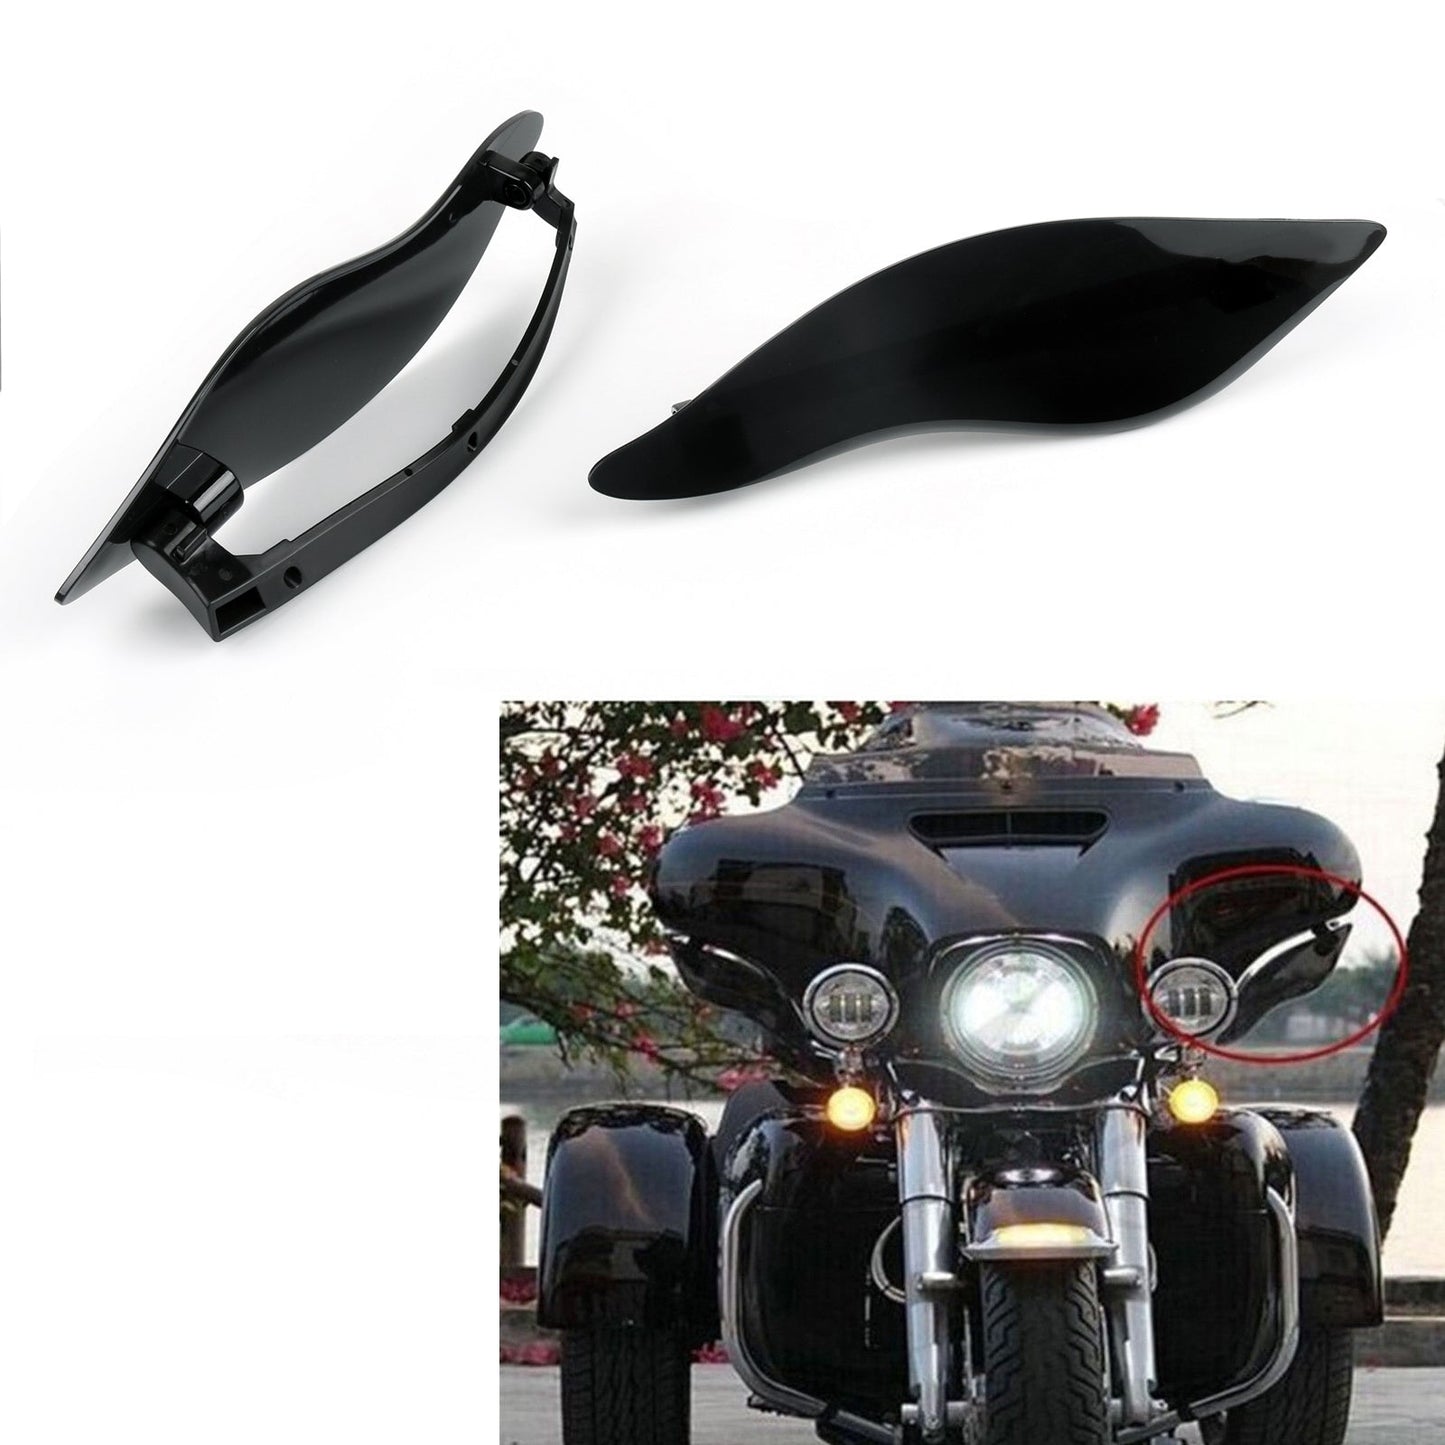 2 x ABS Plastic Side Wings Air Deflectors For Harley Davidson Touring FL 2014-2018, 2 Color